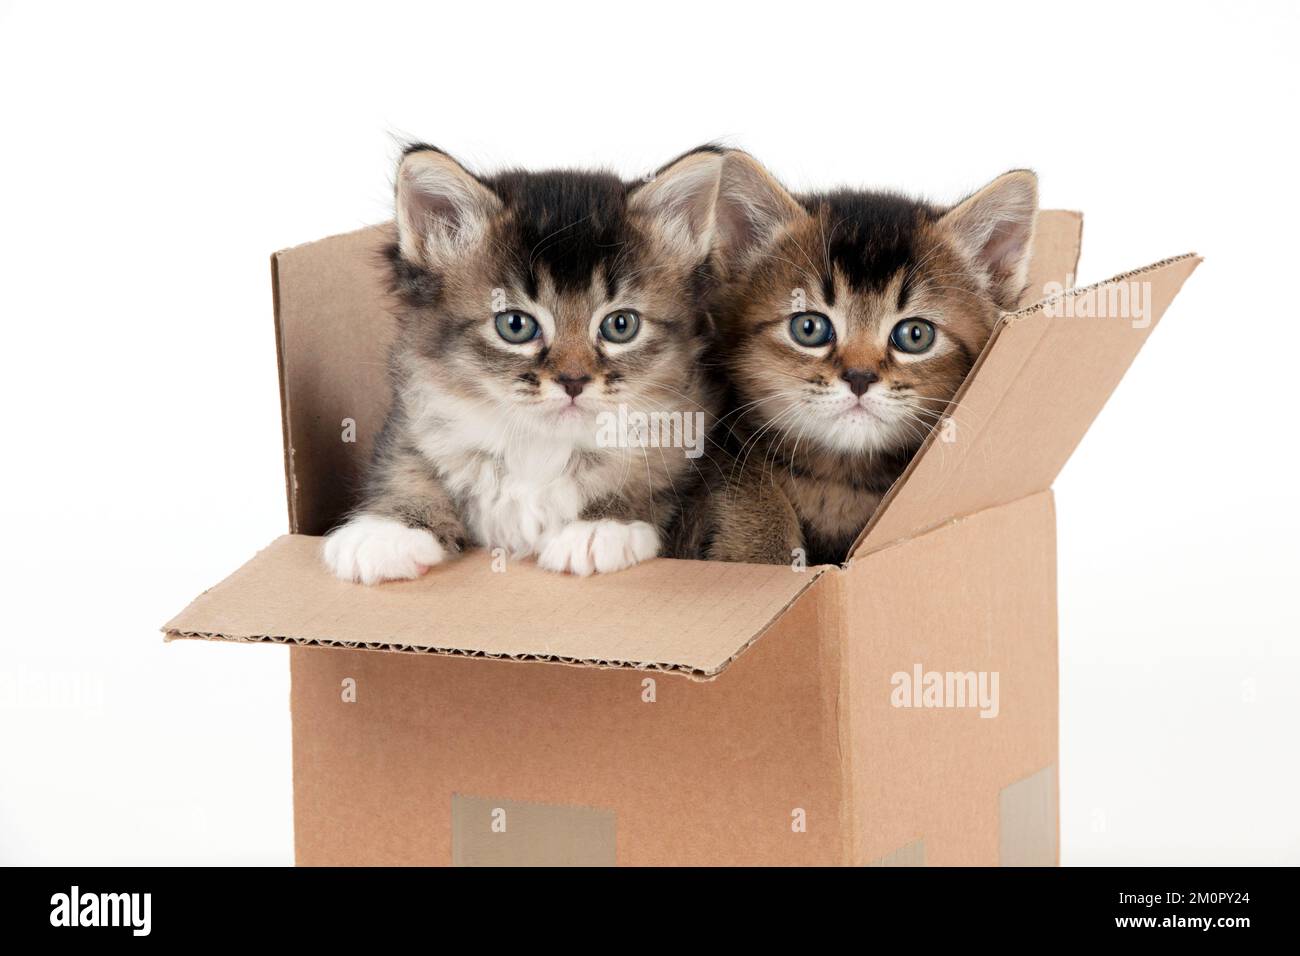 CHAT - chaton somalien x tabby en carton - 5 semaines Banque D'Images